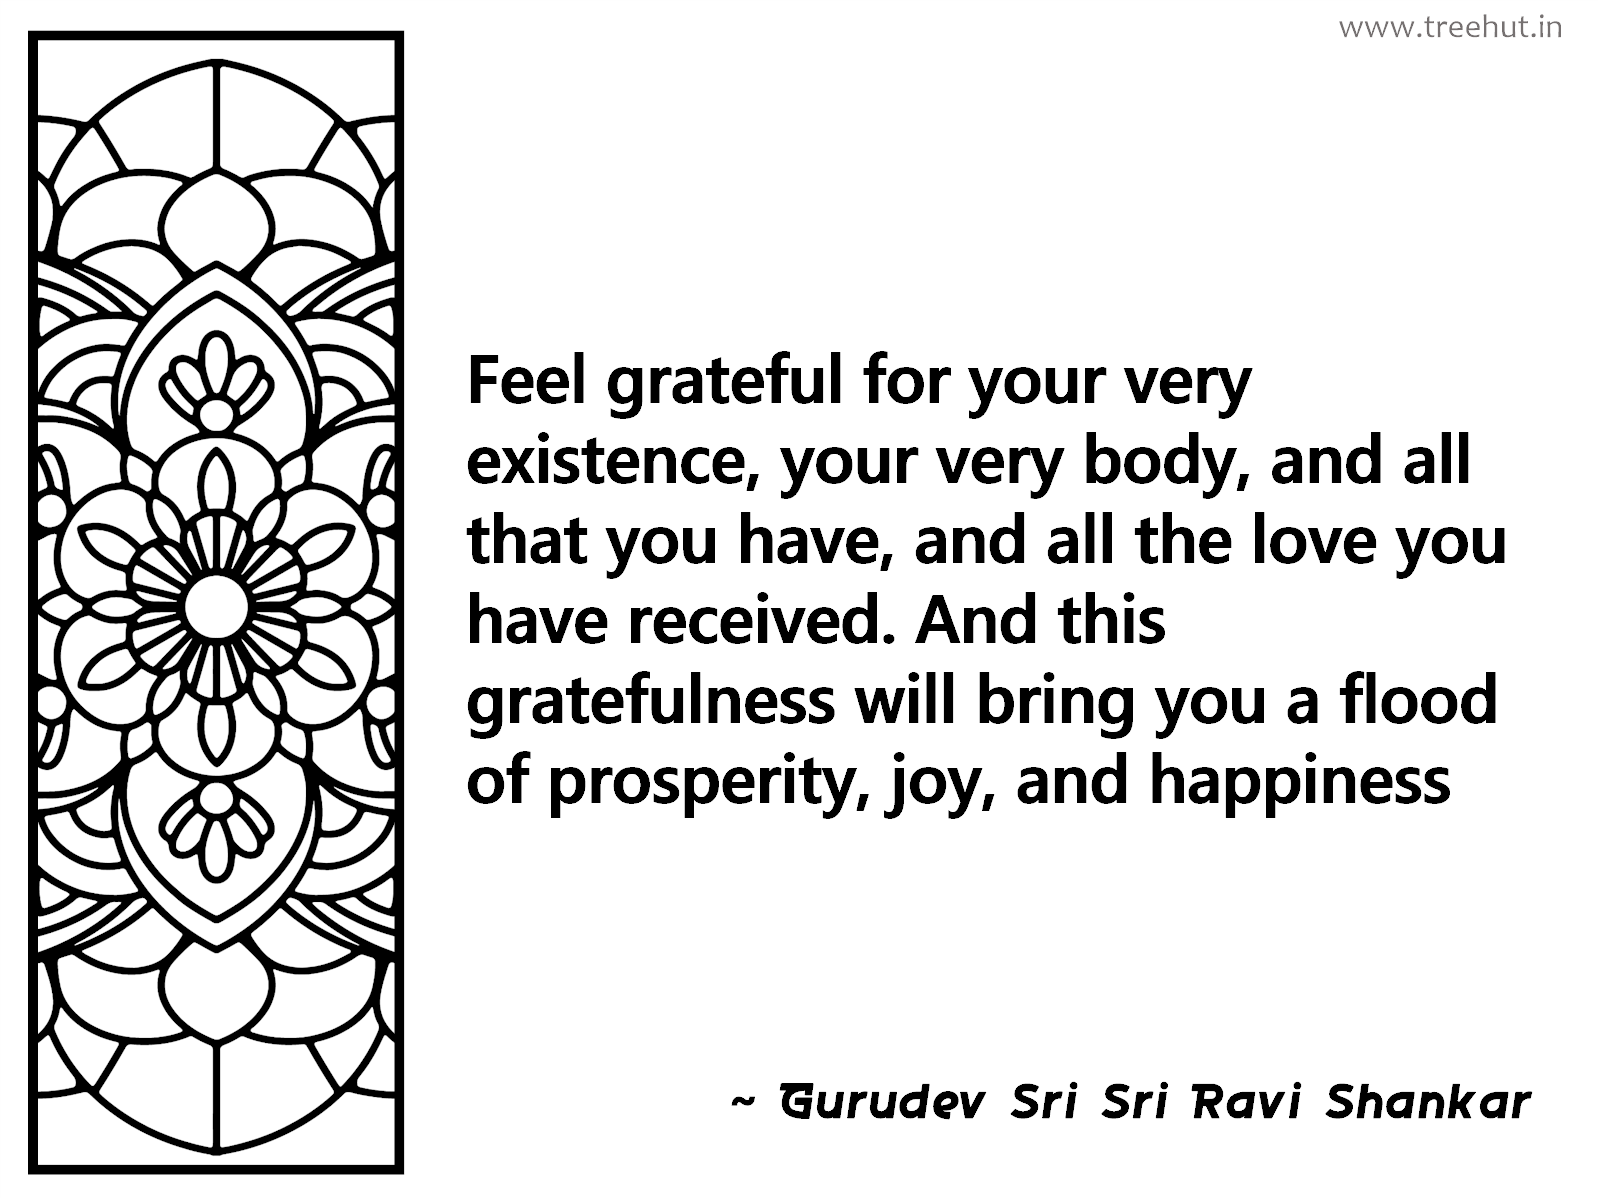 Feel grateful for your very existence, your very body, and all that you have, and all the love you have received. And this gratefulness will bring you a flood of prosperity, joy, and happiness Inspirational Quote by Gurudev Sri Sri Ravi Shankar, coloring pages